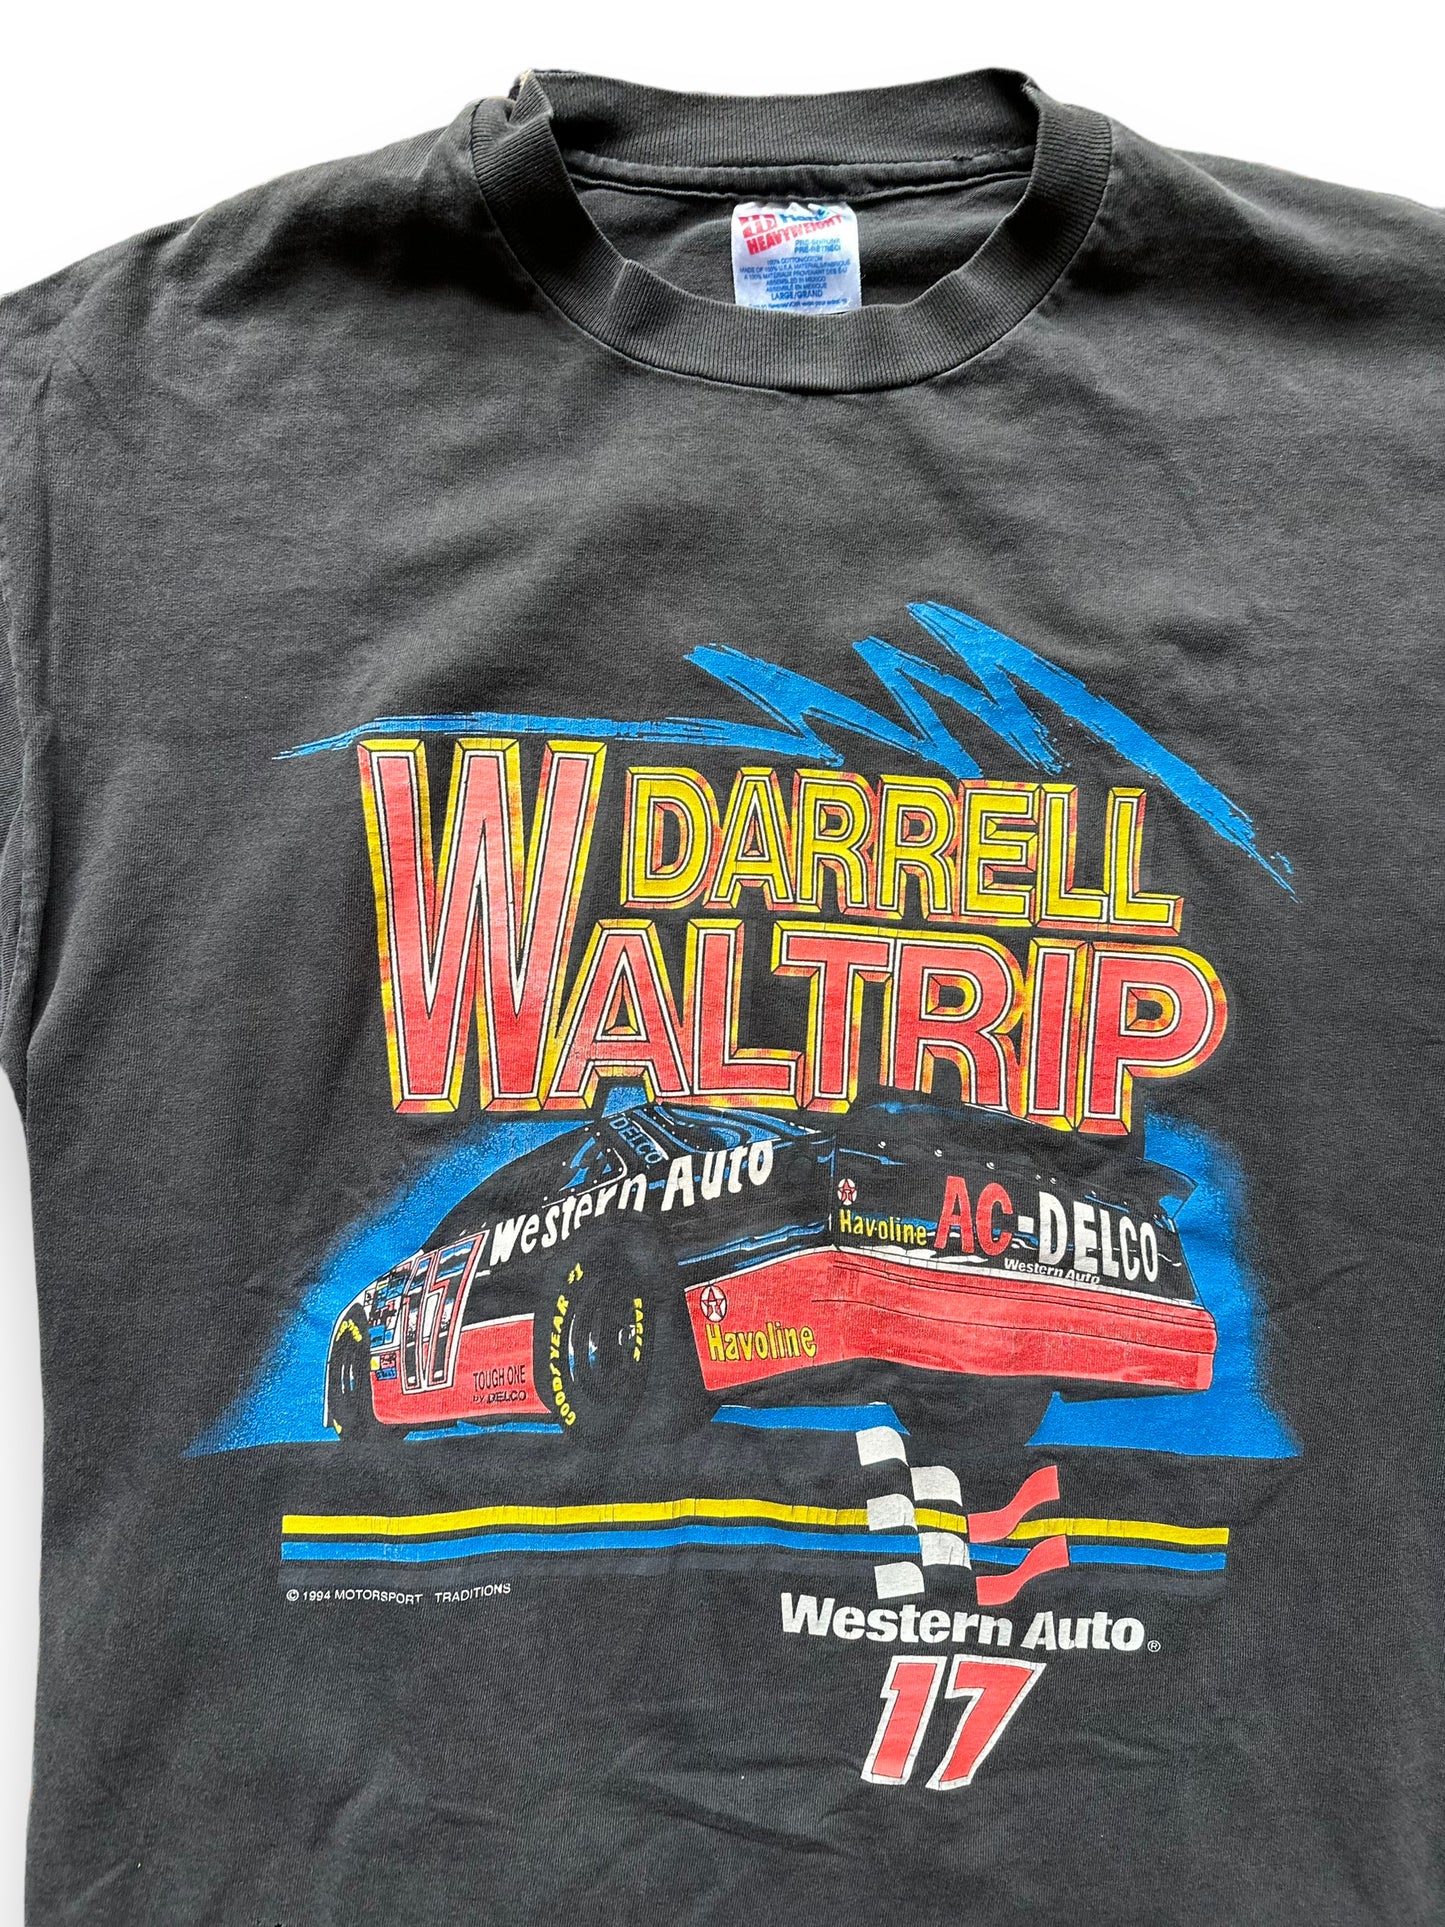 Front Graphic View of Vintage Darrell Waltrip Racing Tee Size L | Vintage NASCAR Tee | Barn Owl Vintage Seattle